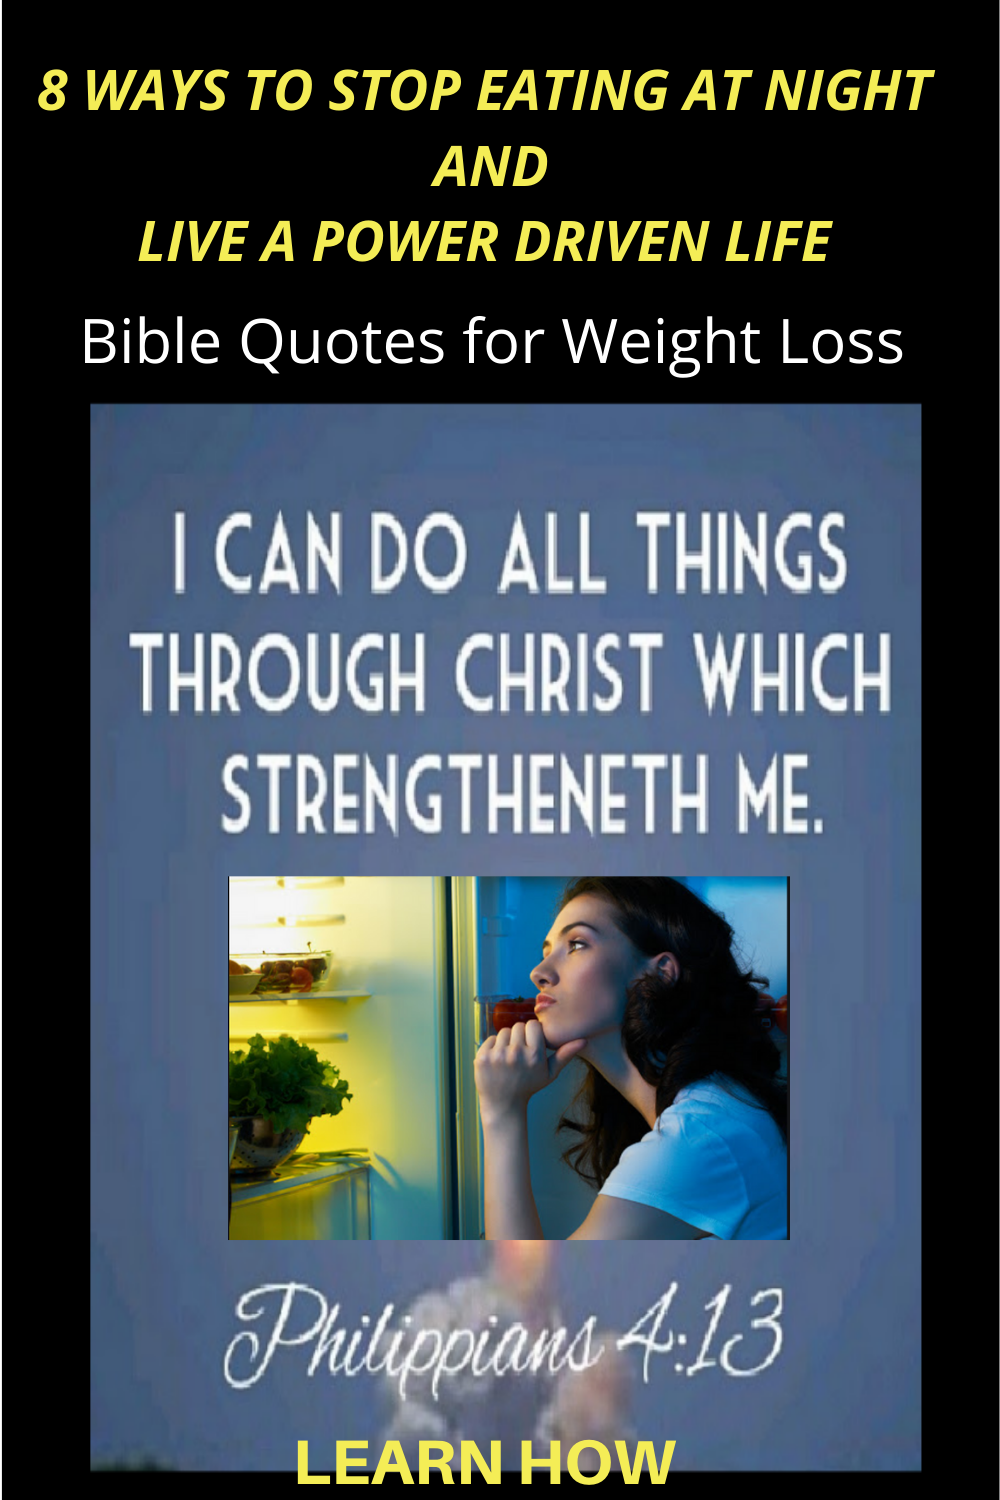 Stop eating at night - weight loss help for christians 